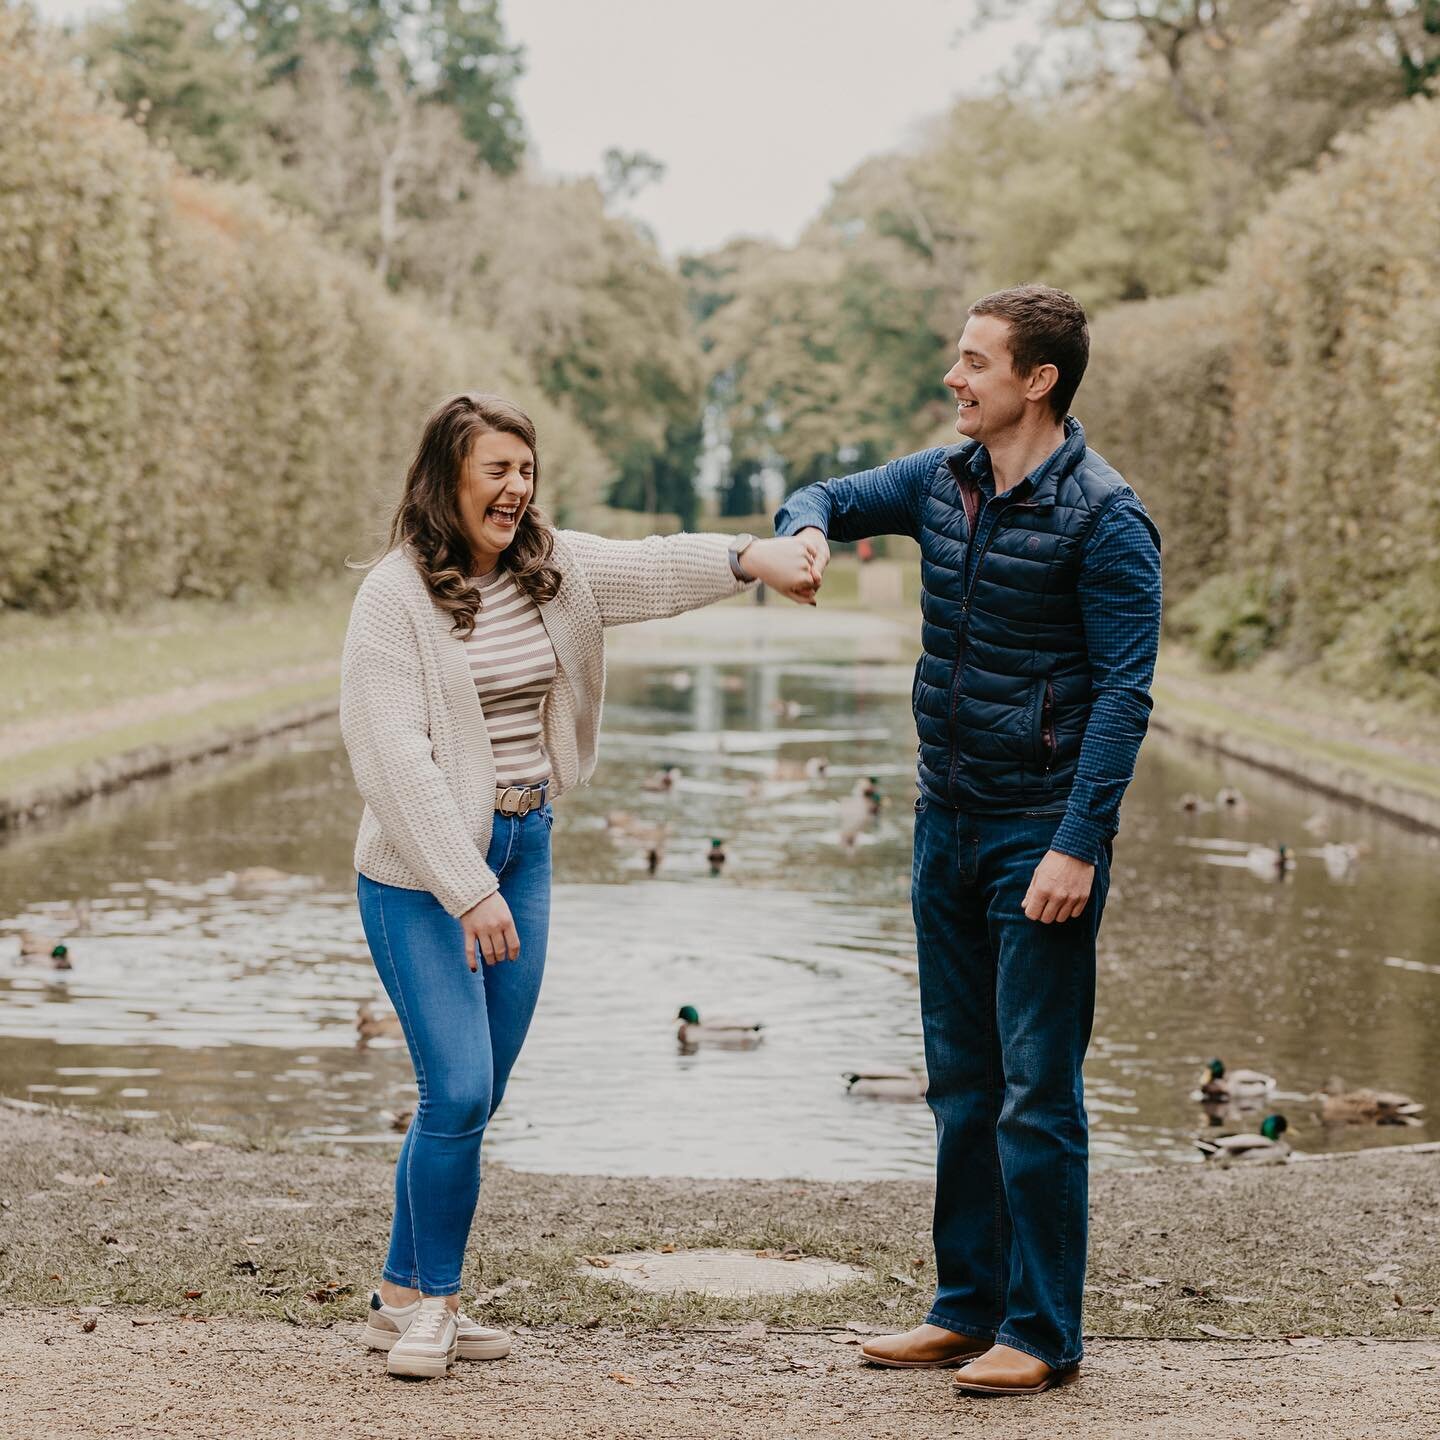 Wee engagement shoot gallery going out this evening for Michelle &amp; James 😍 
.
.
#cindyrobinsonphotography #youbeyou #engagementphotos #engagementphotography #gettingmarriedsoon #antrim #weddingphotographerni #niweddingphotographer #femalephotogr